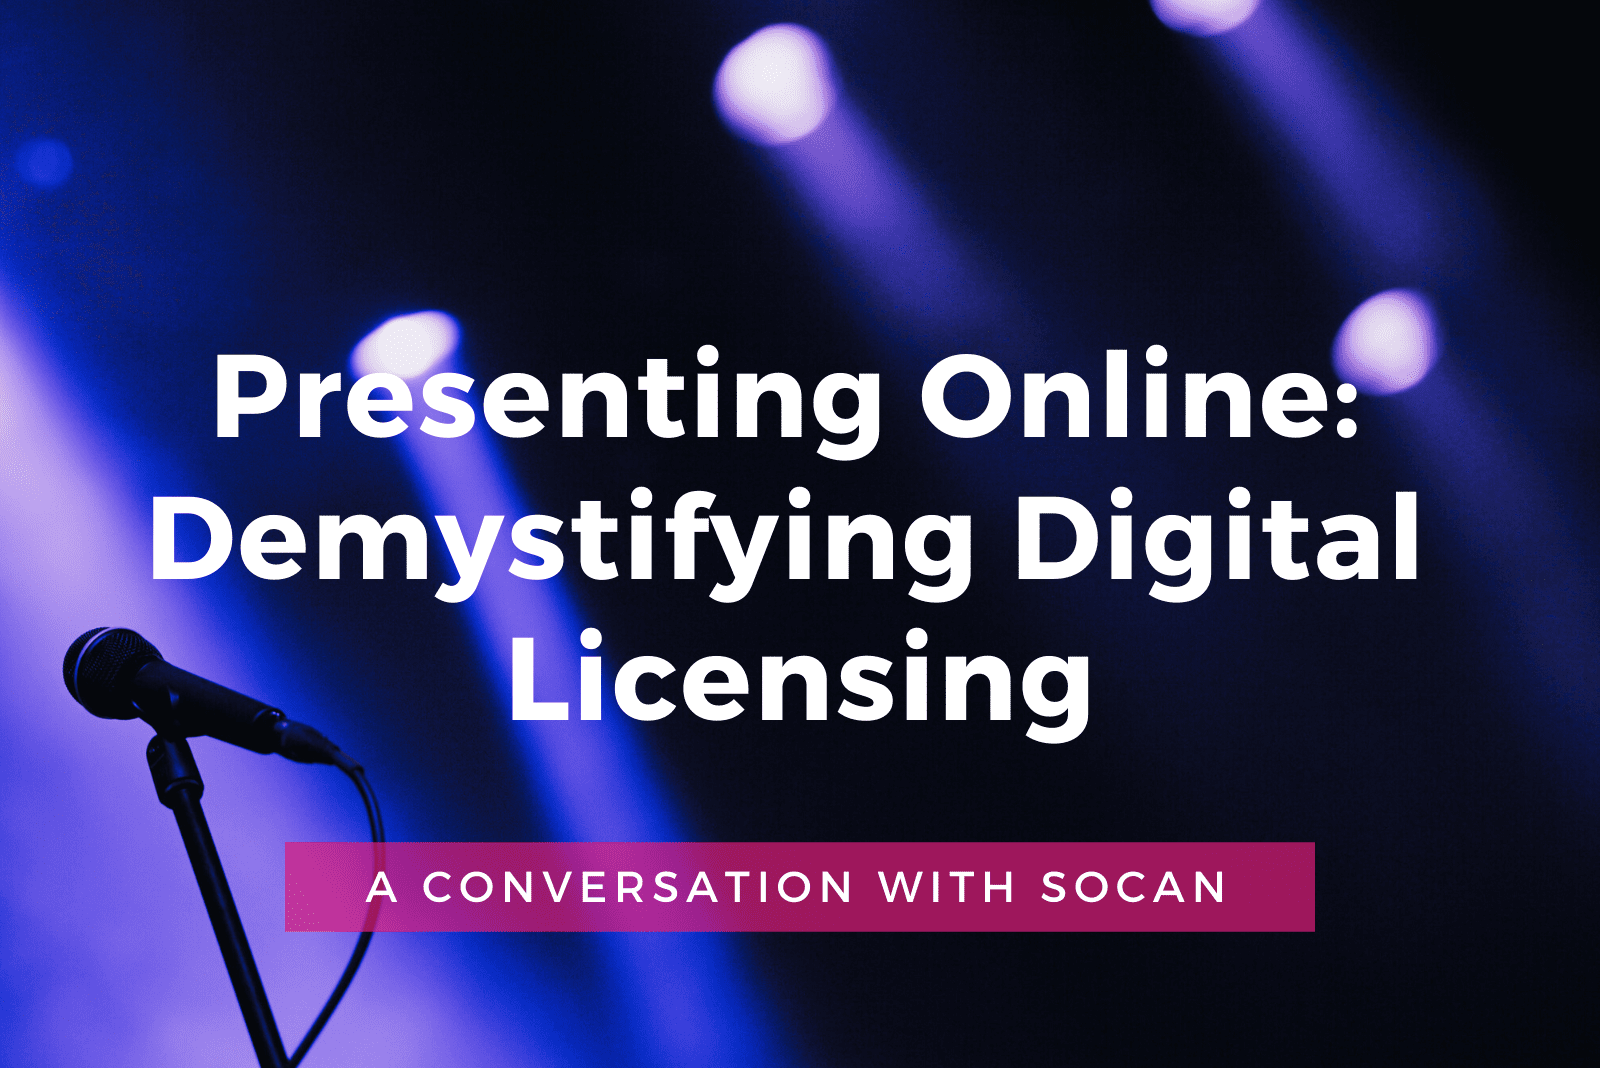 Presenting Online: Demystifying Digital Licensing A Conversation with SOCAN